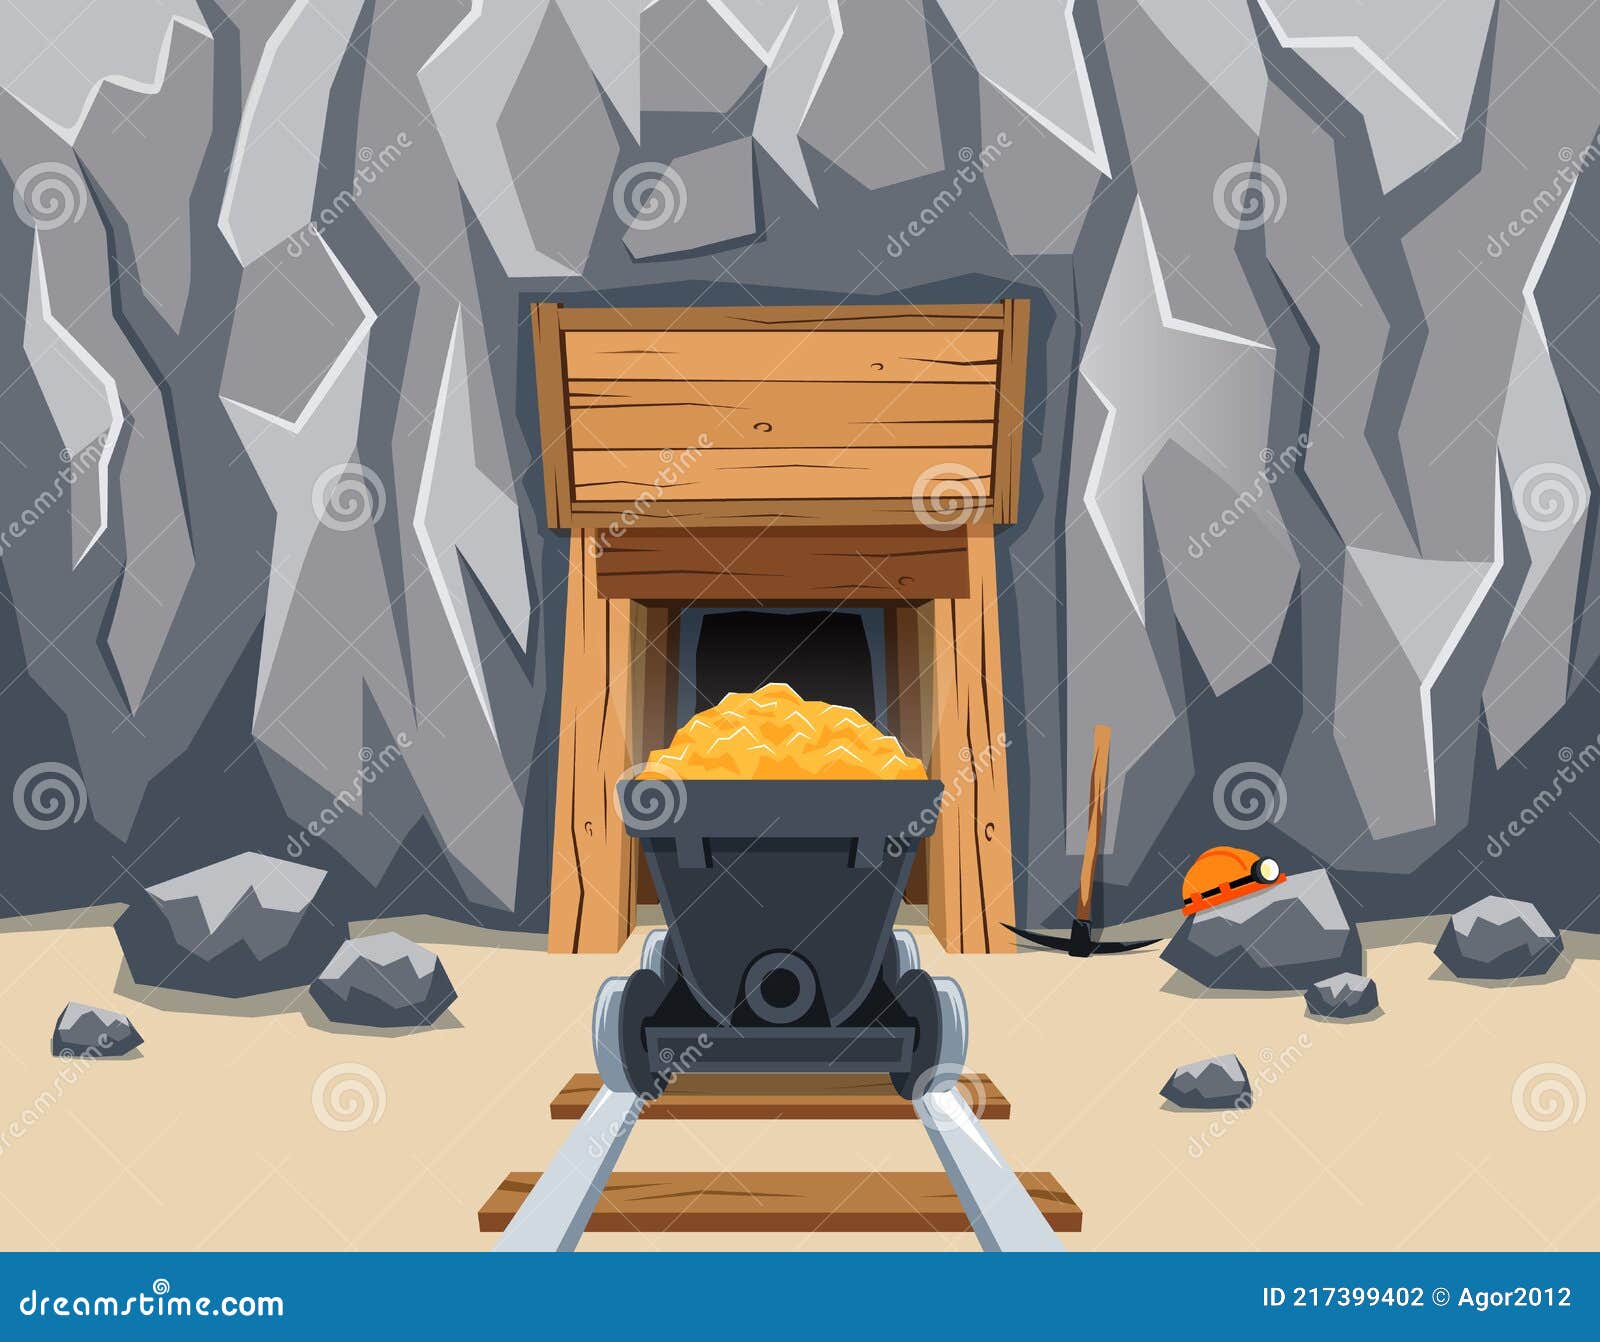 Entrance to gold mine stock vector. Illustration of wooden - 217399402